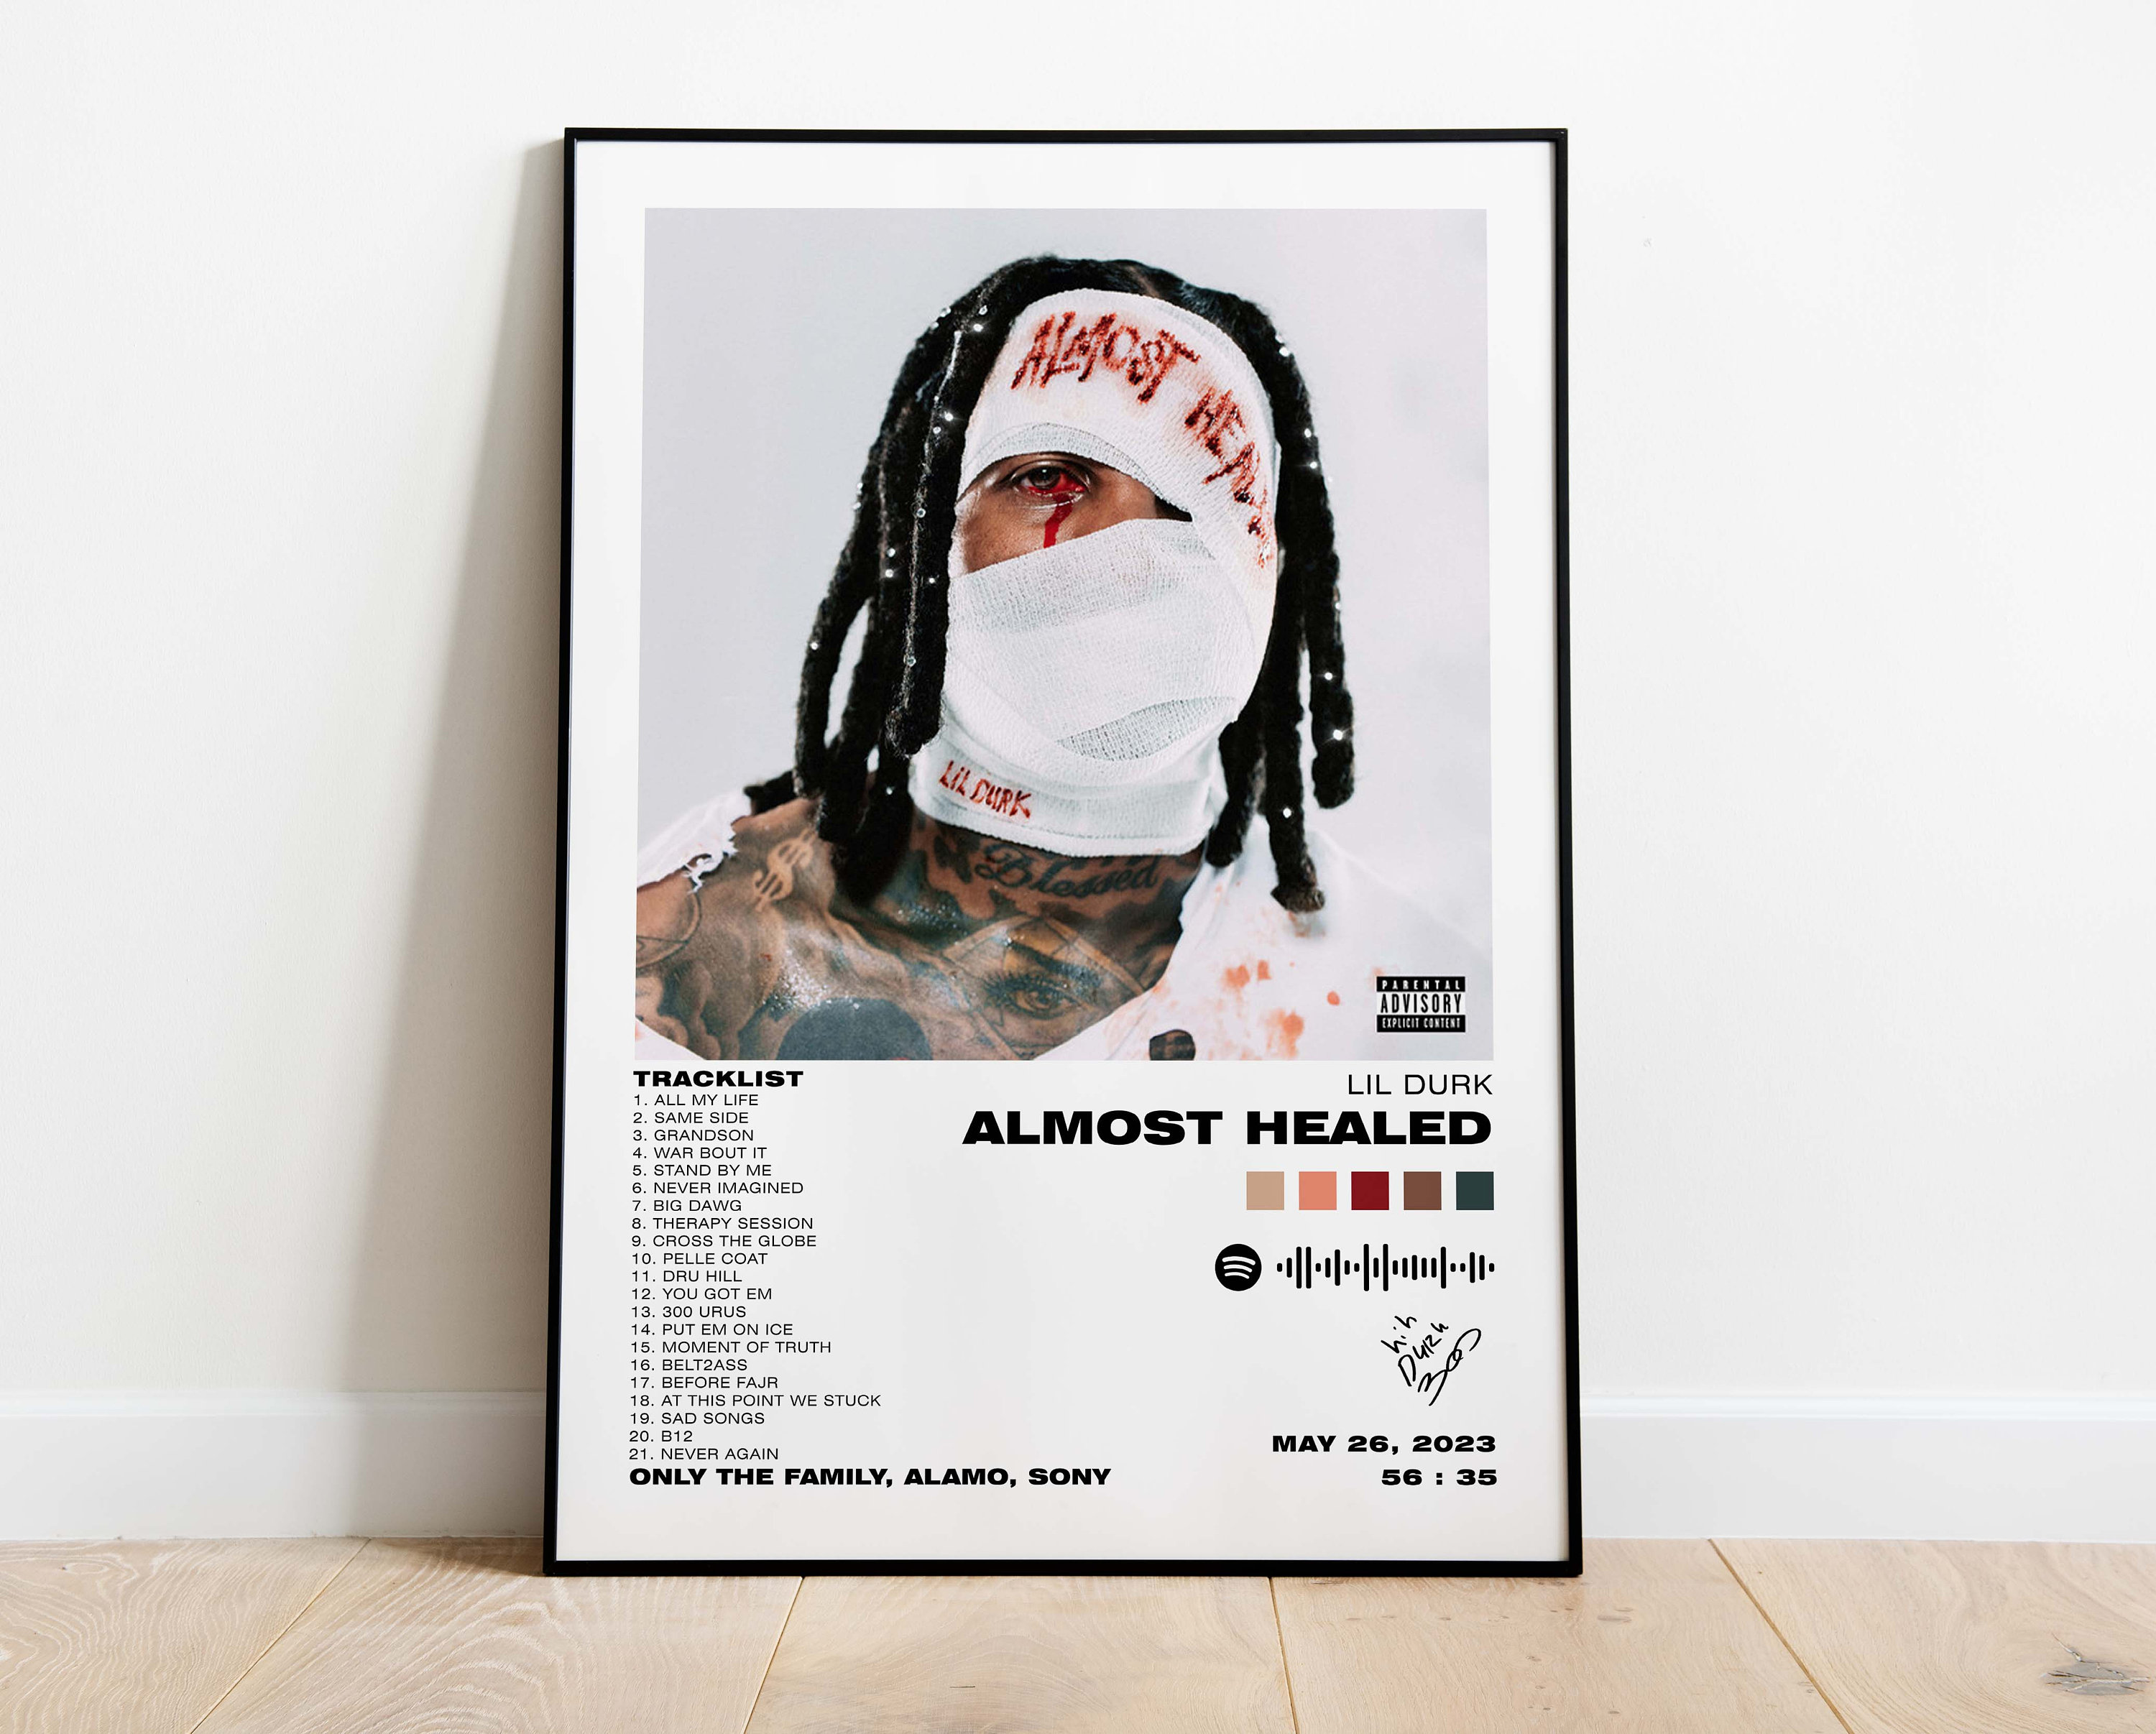 King Poster Von Welcome To O Block Music Album Poster Poster